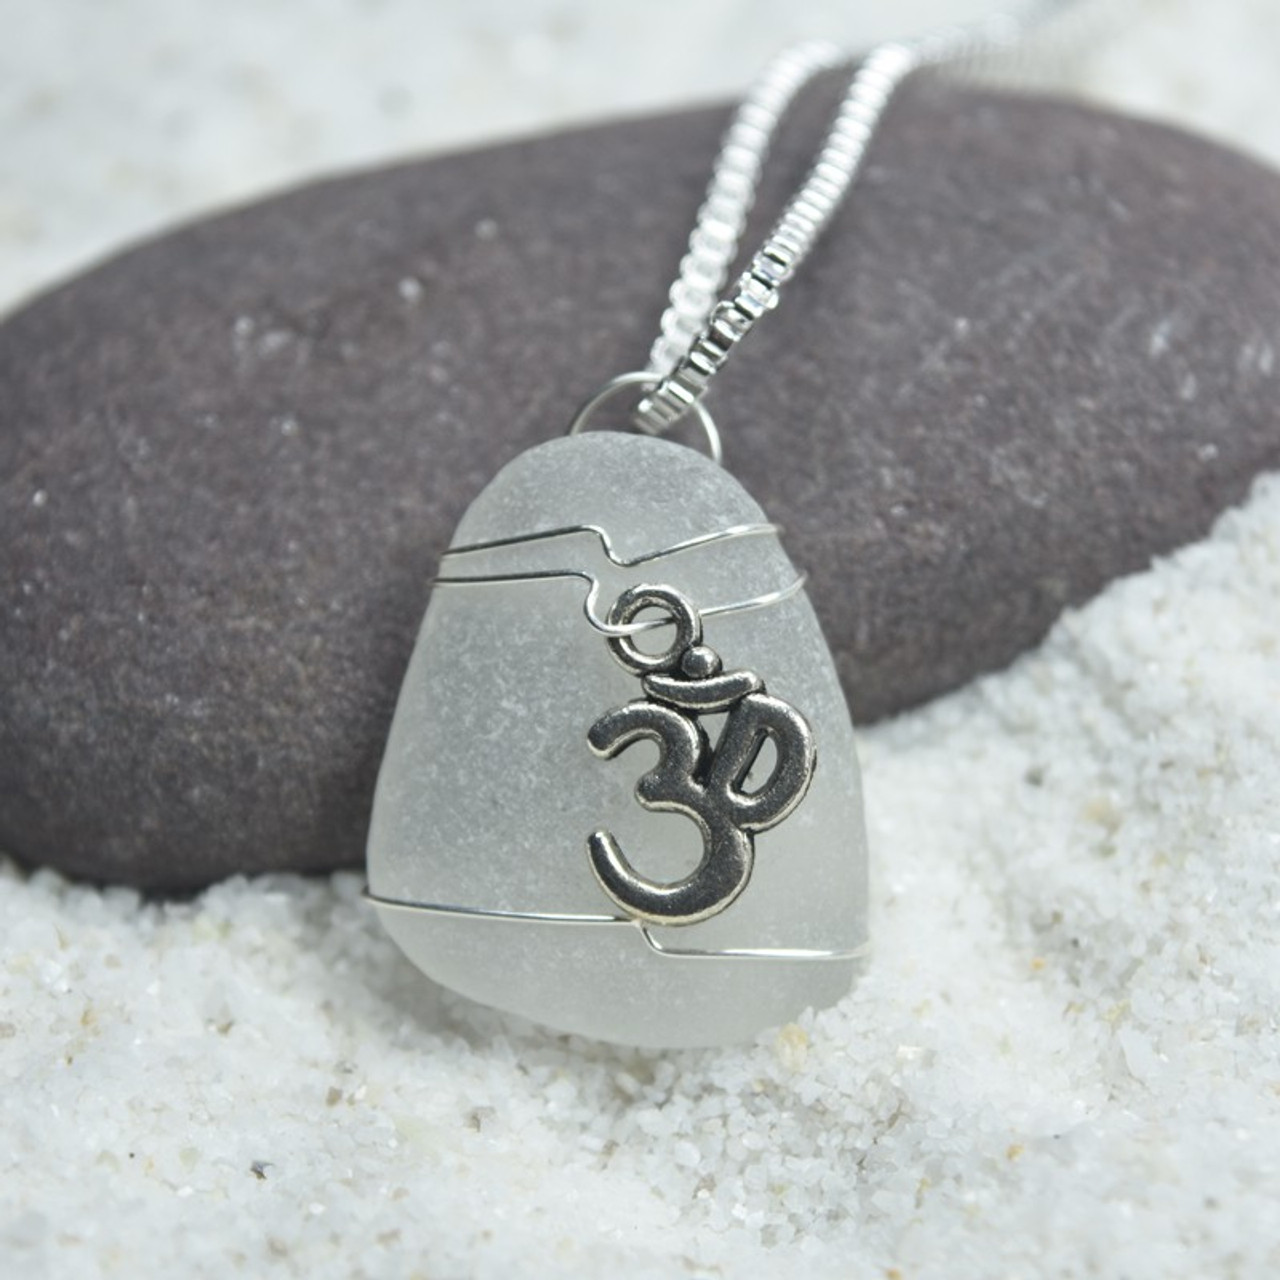 Genuine Sea Glass Necklace with a Silver Yoga Ohm Charm - Choose the Color - Frosted, Green, Brown, or Aqua - Made to Order